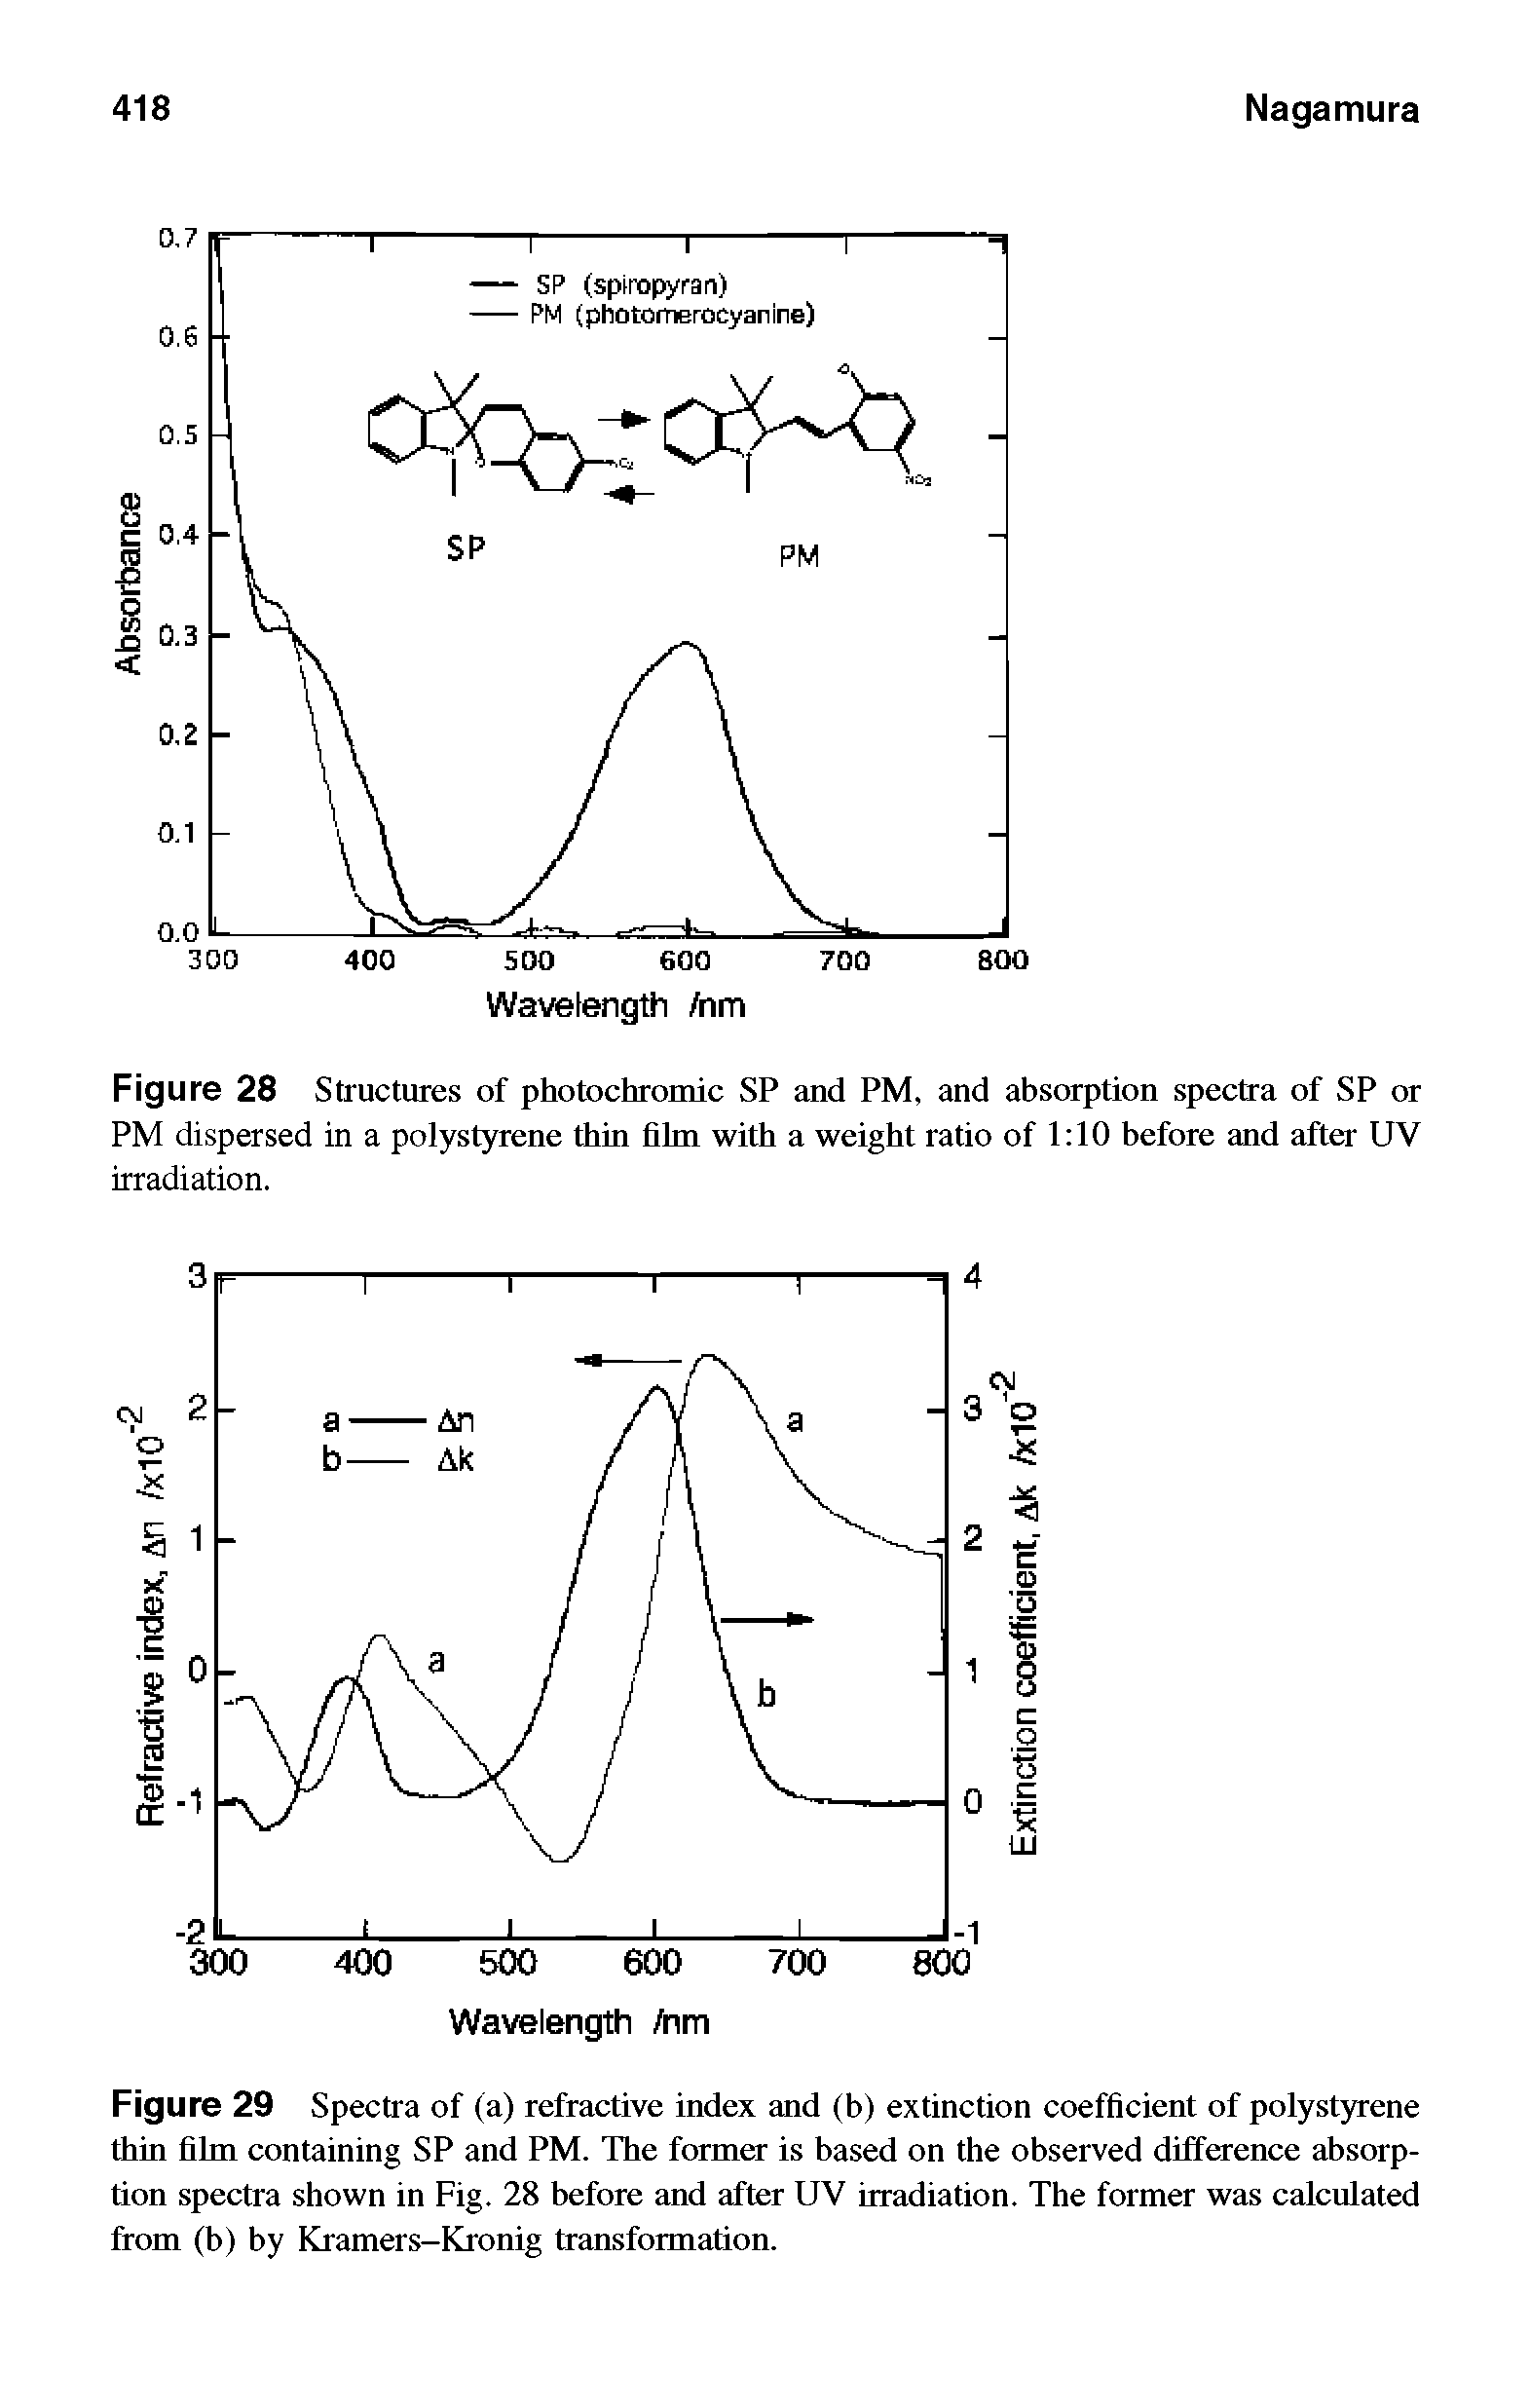 Figure 28 Structures of photochromic SP and PM, and absorption spectra of SP or PM dispersed in a polystyrene thin film with a weight ratio of 1 10 before and after UV irradiation.